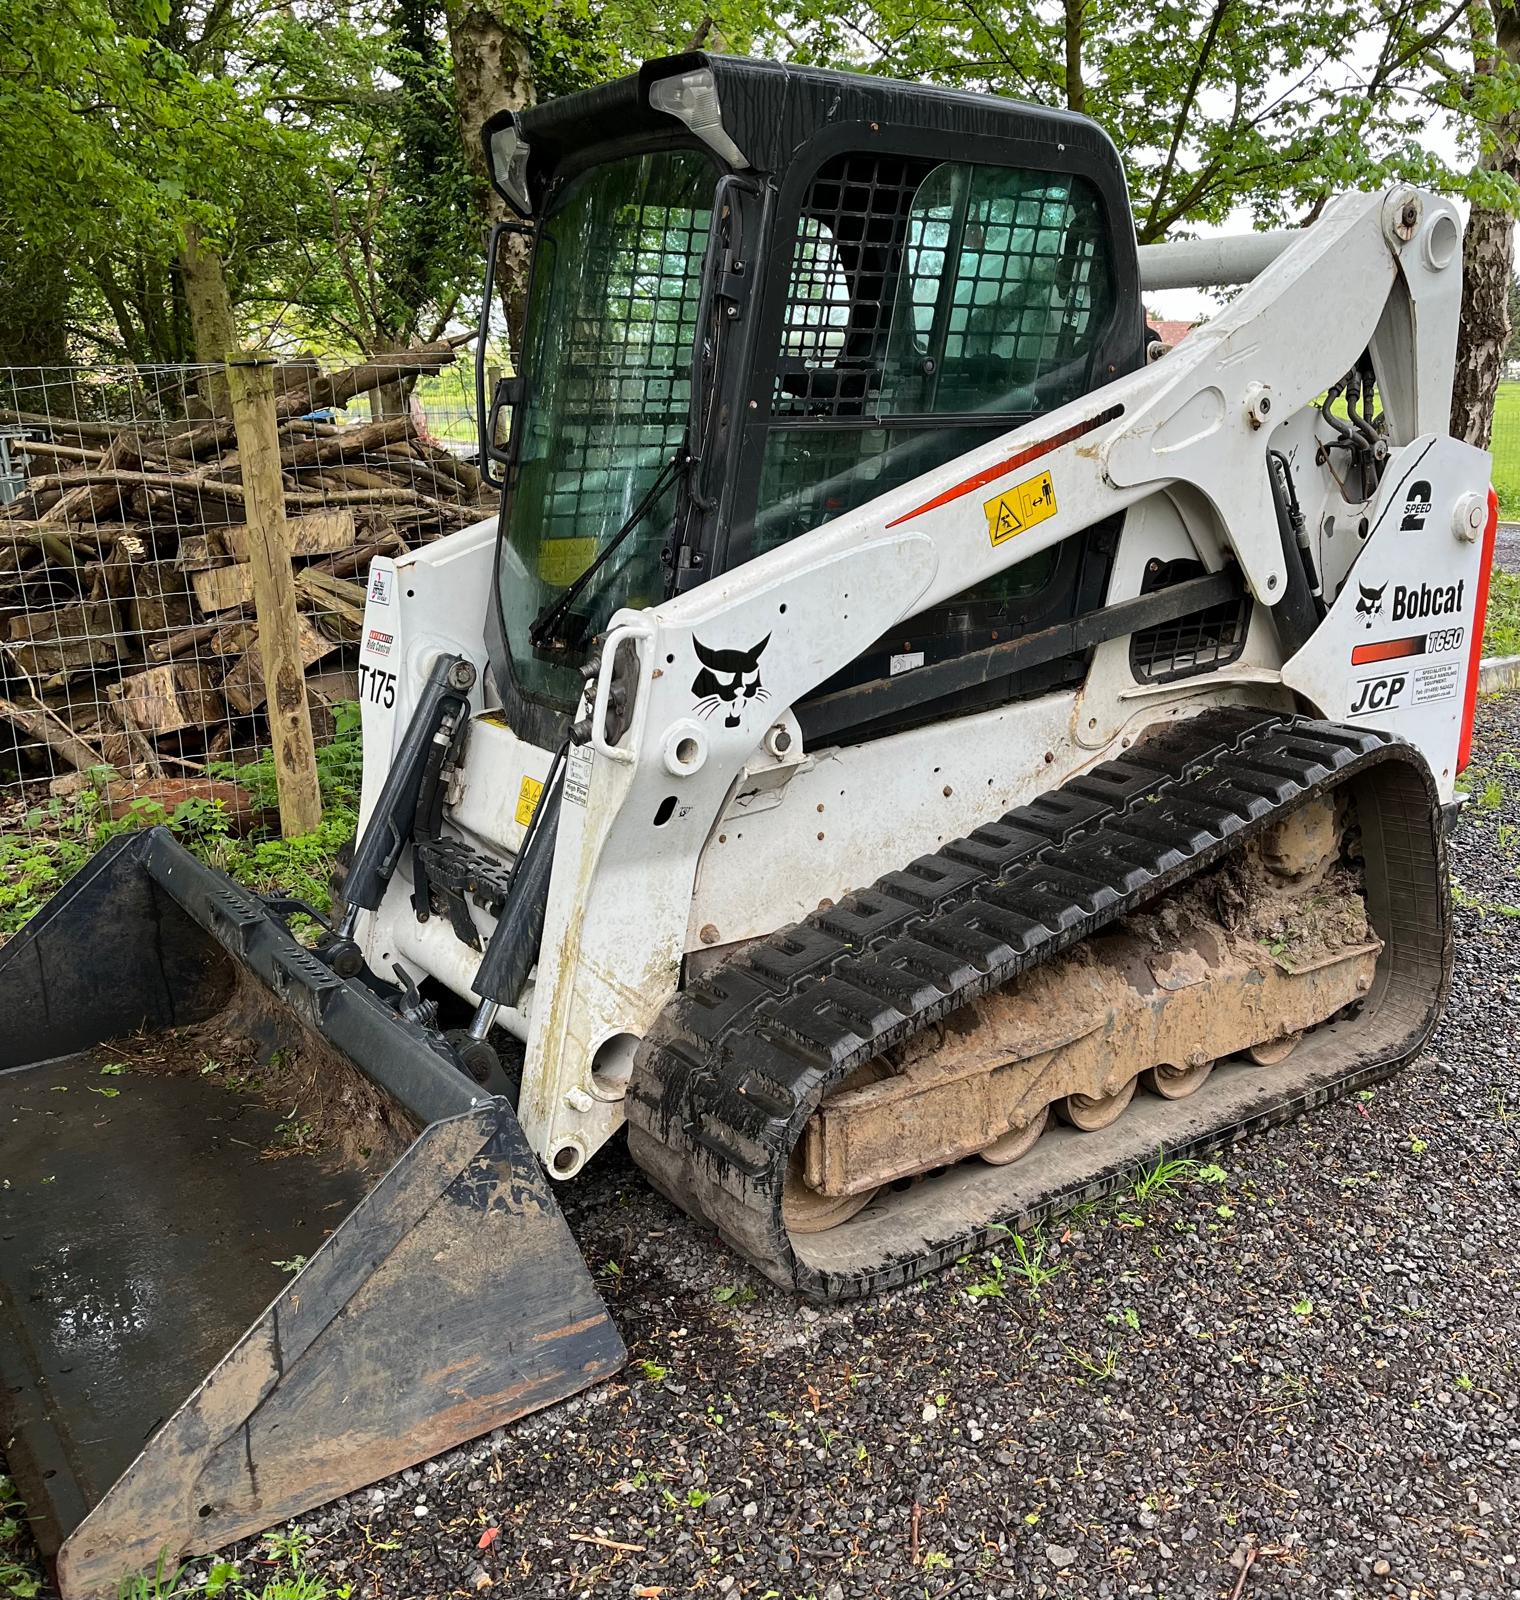 Used Bobcat T650 at AMS Bobcat Ltd - 0800 998 1354 <small>(Free from most landlines)</small>